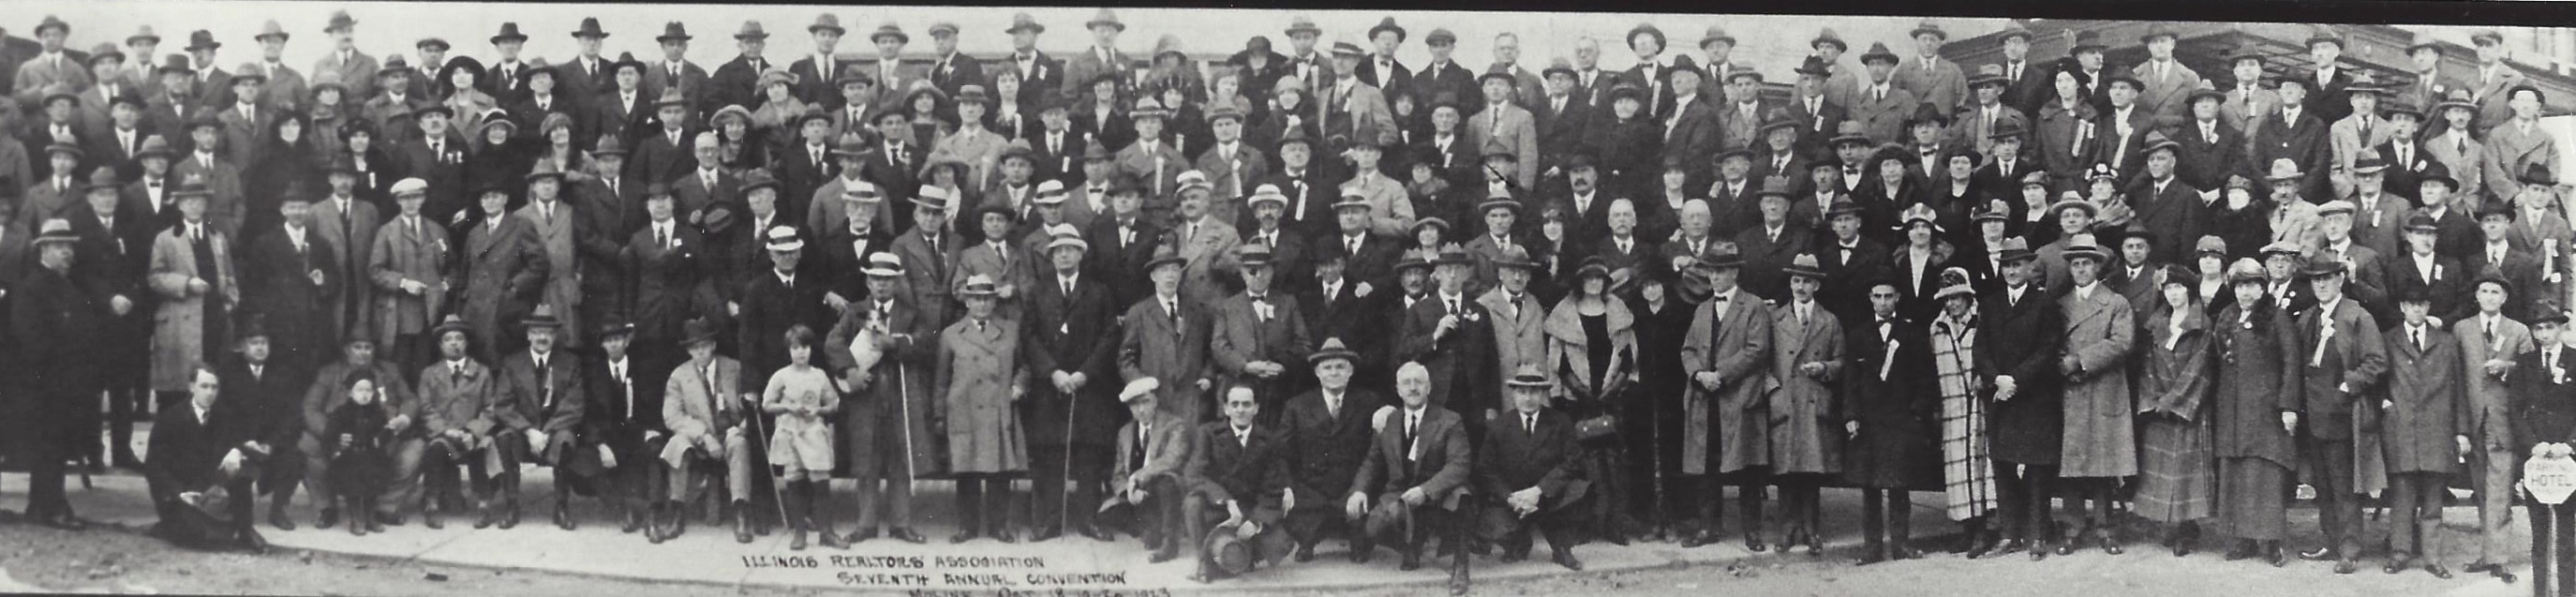 IAR holds its seventh annual convention in Moline, Ill., in 1923.